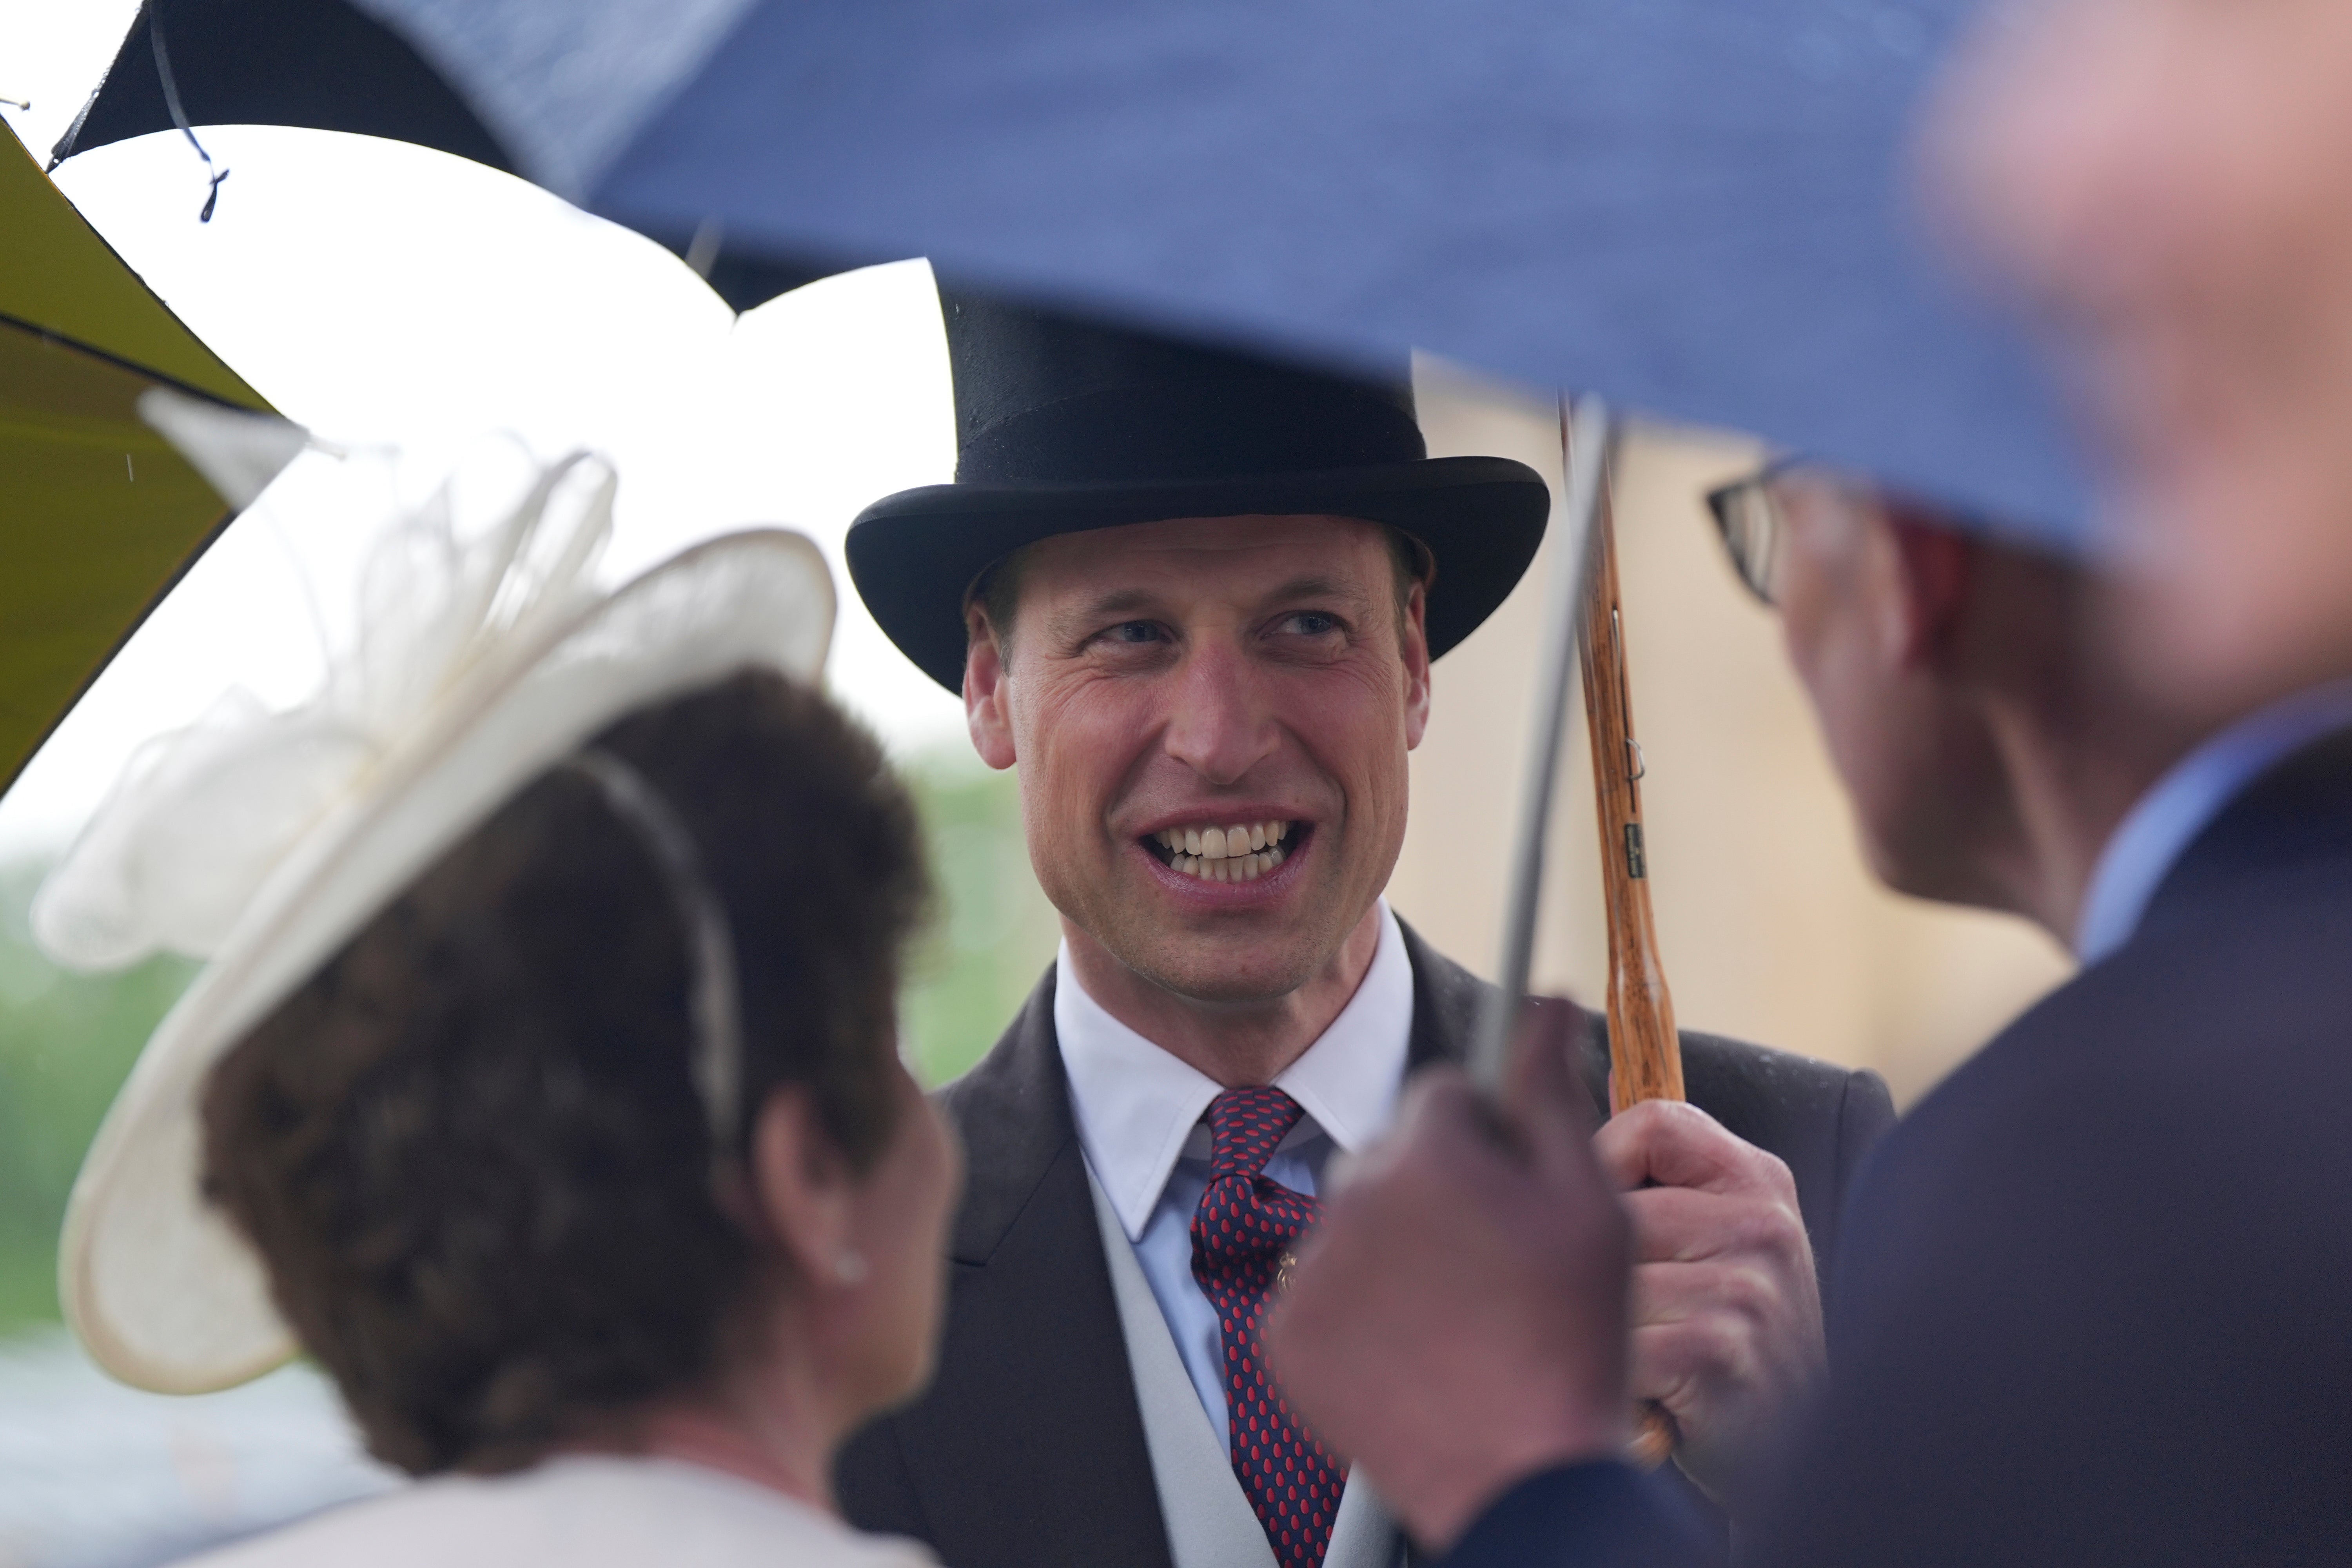 Yesterday’s Buckingham Palace garden party was a washout